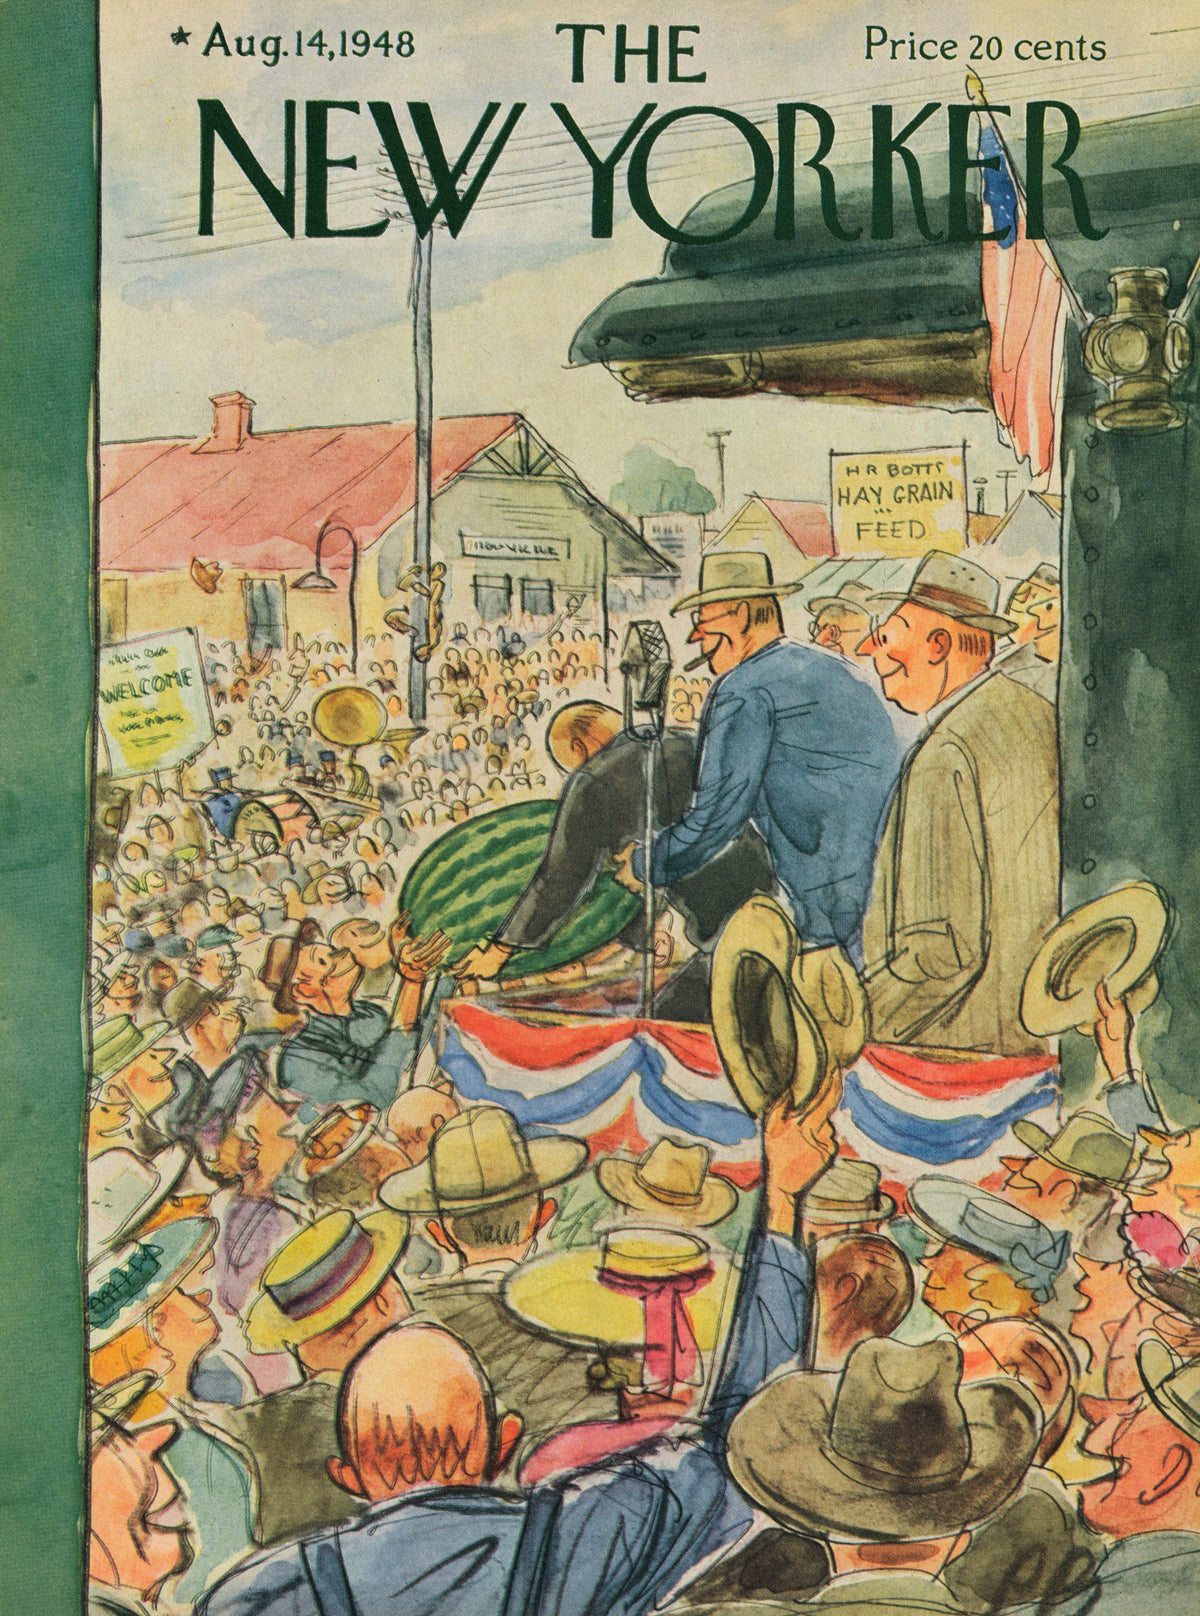 Parade- The New Yorker - Authentic Vintage Antique Print